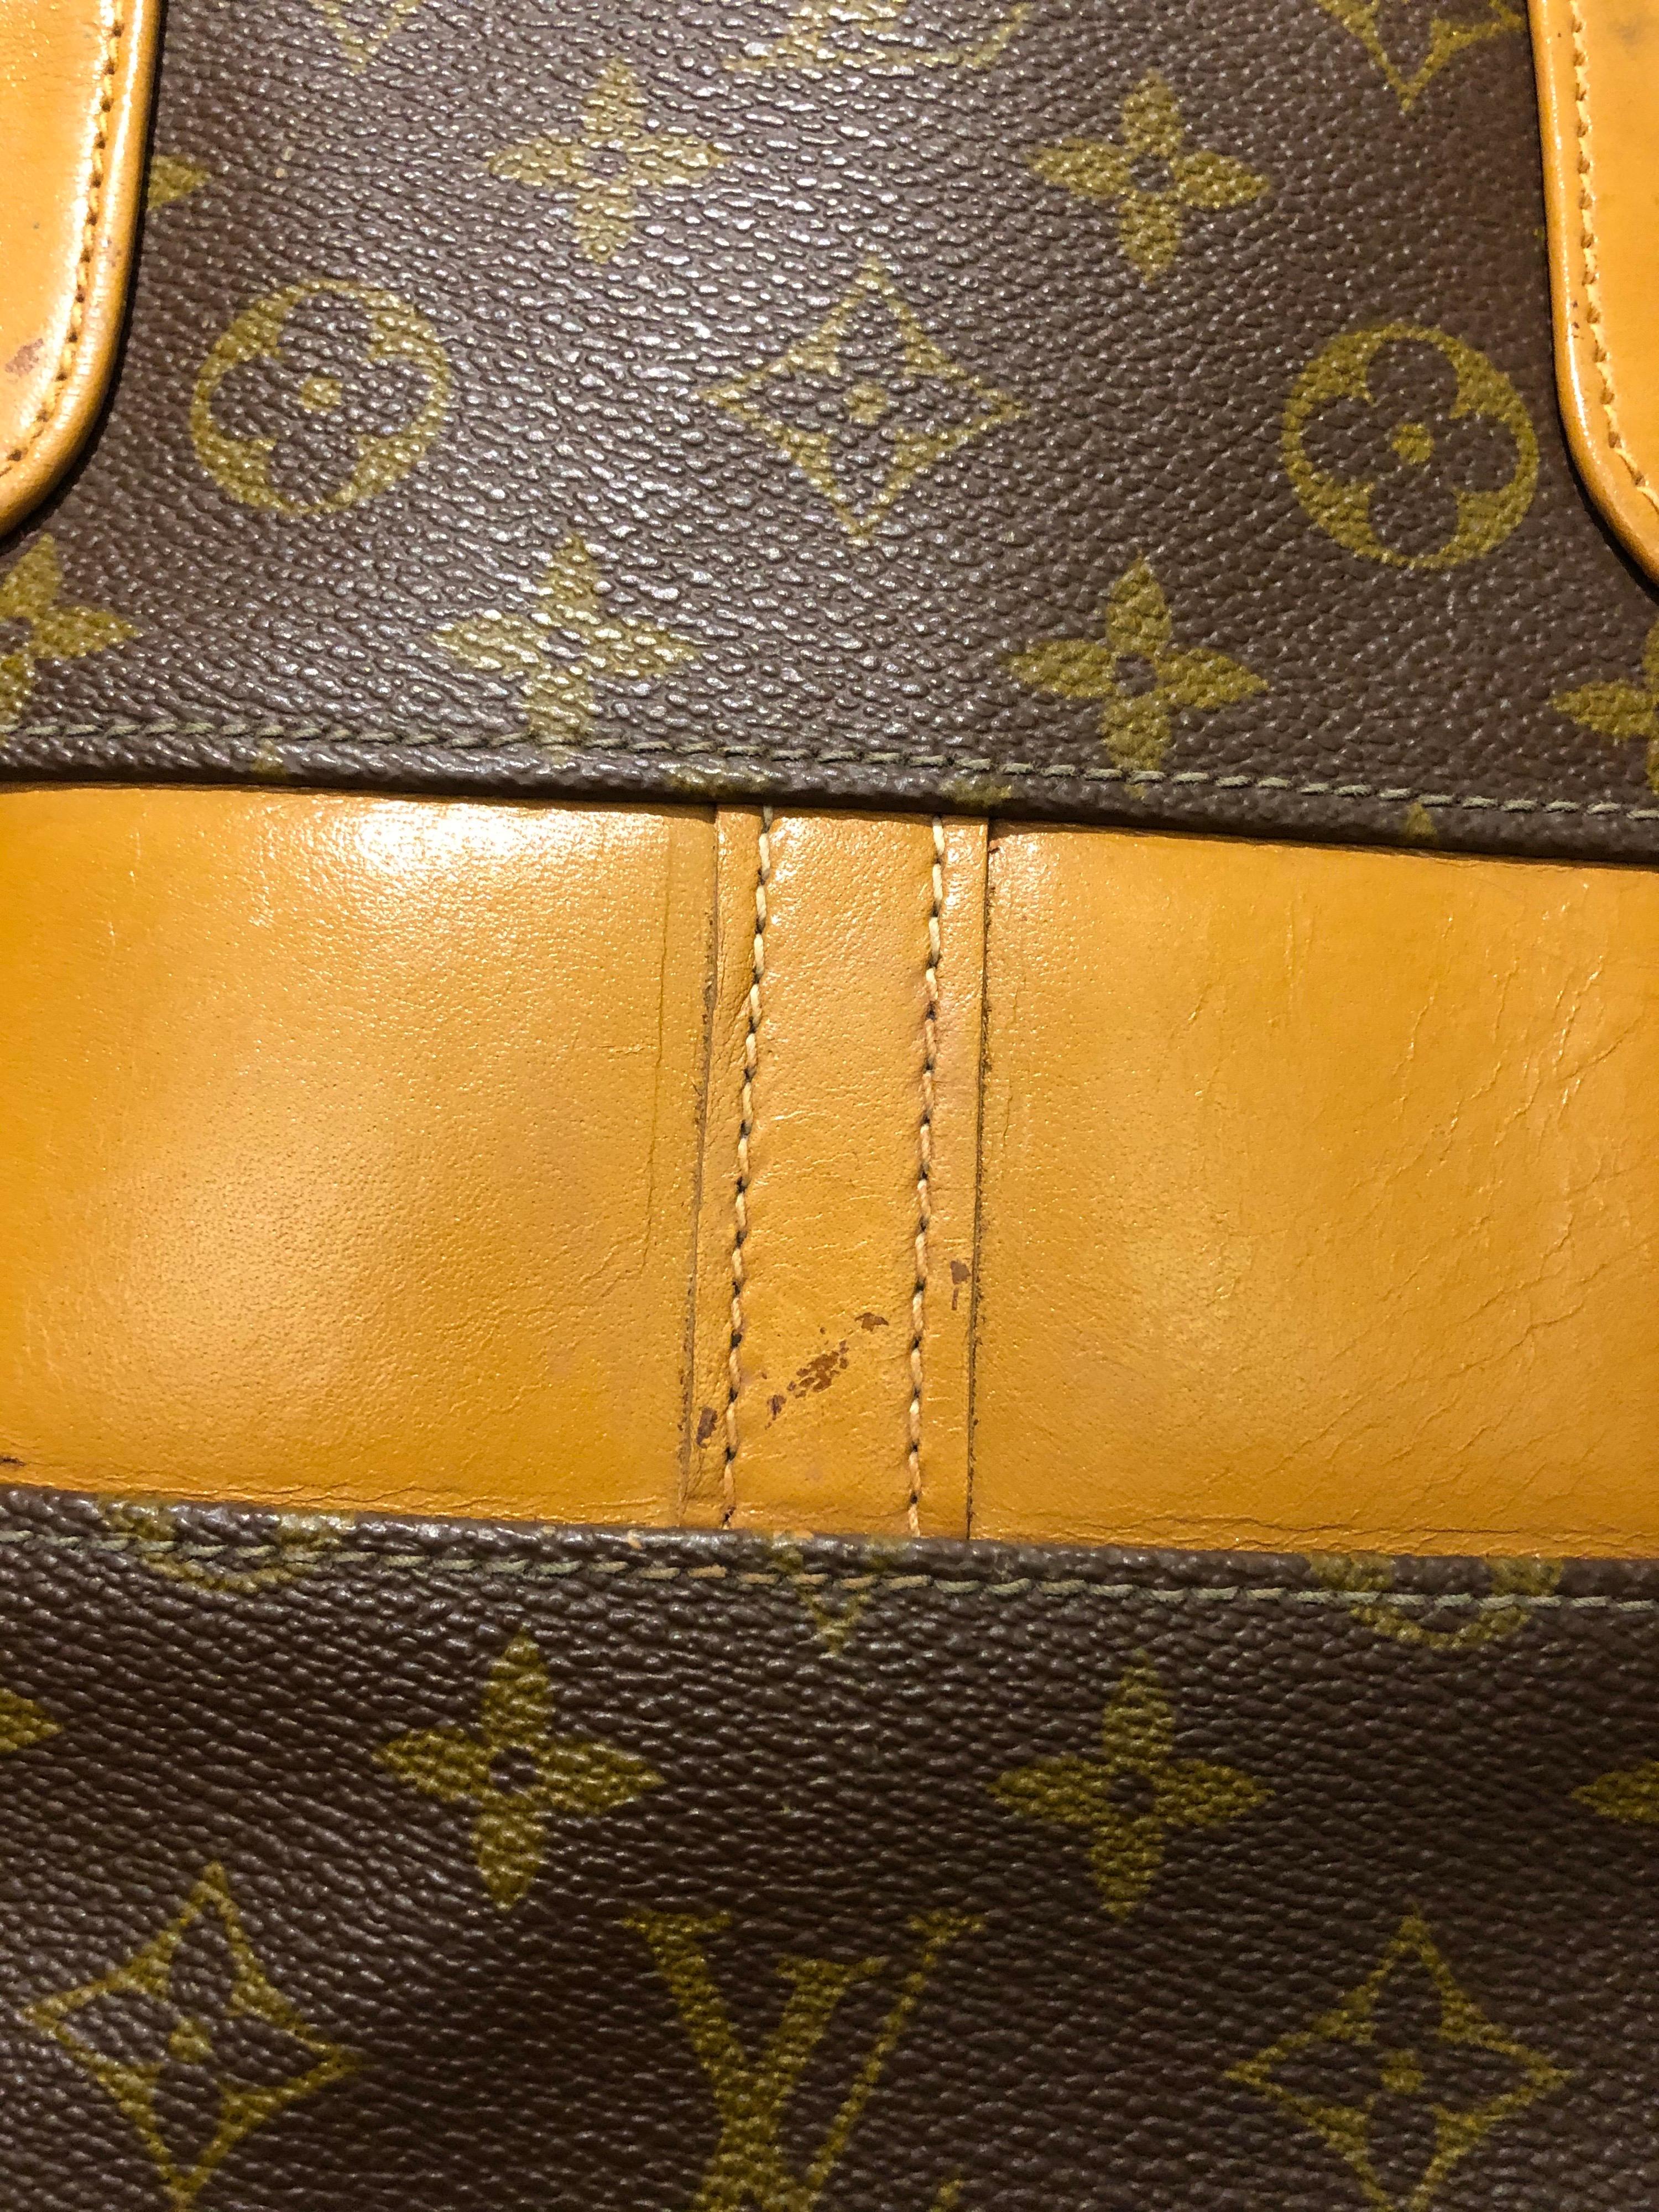 1970s LOUIS VUITTON Monogram Bucket Bag - Under Special License to the French Co 1